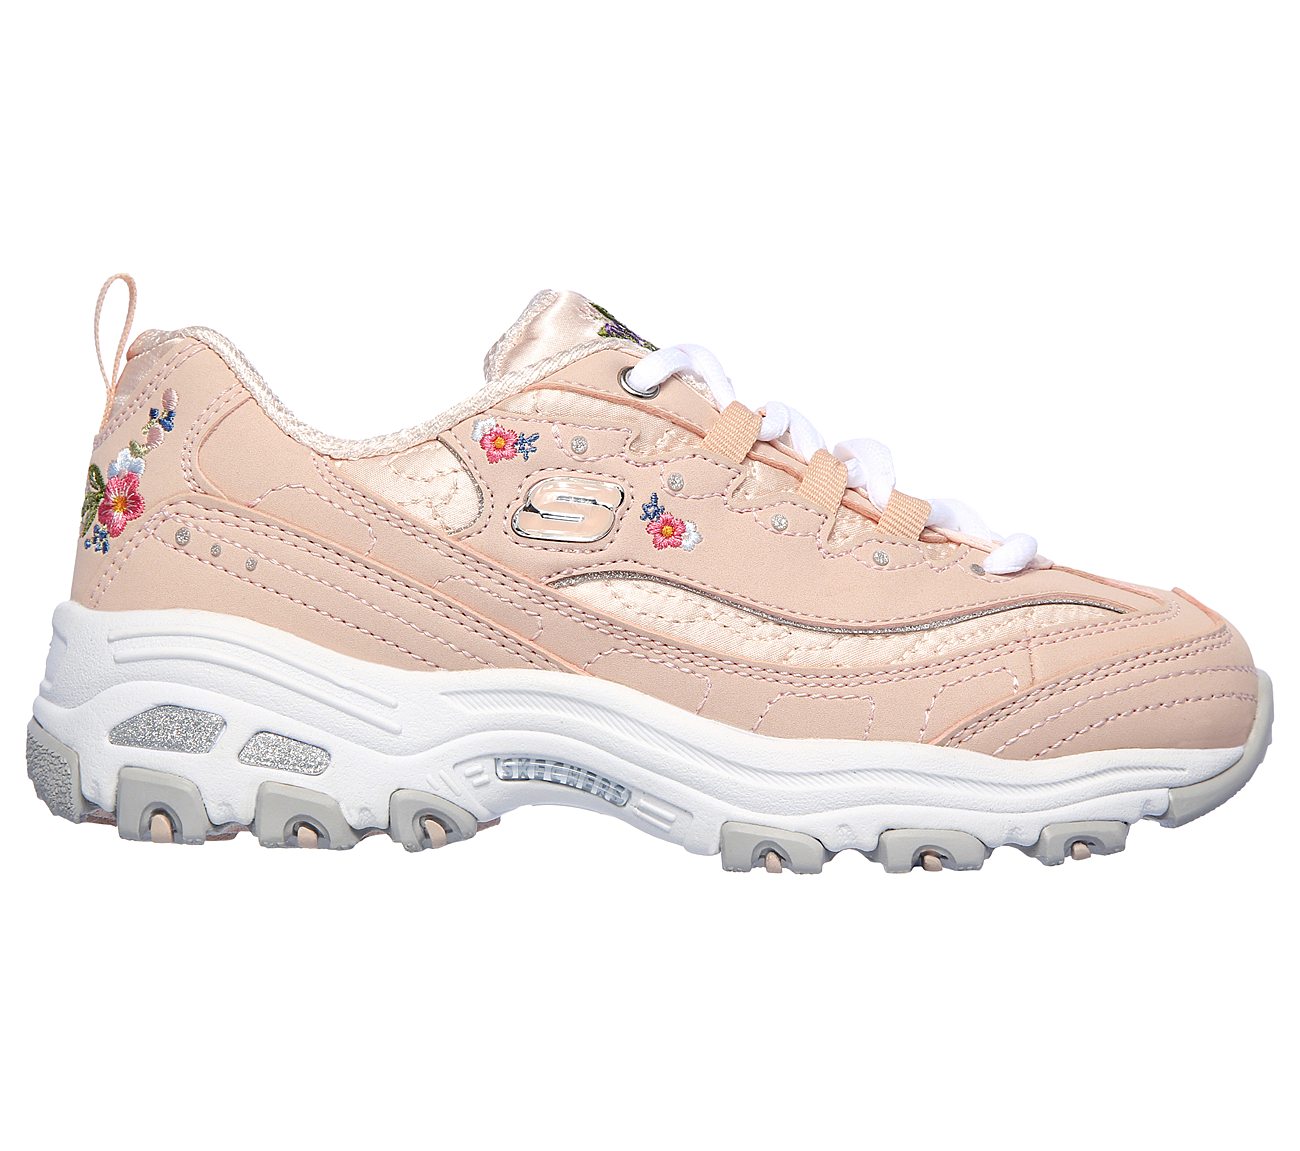 pink skechers with flowers